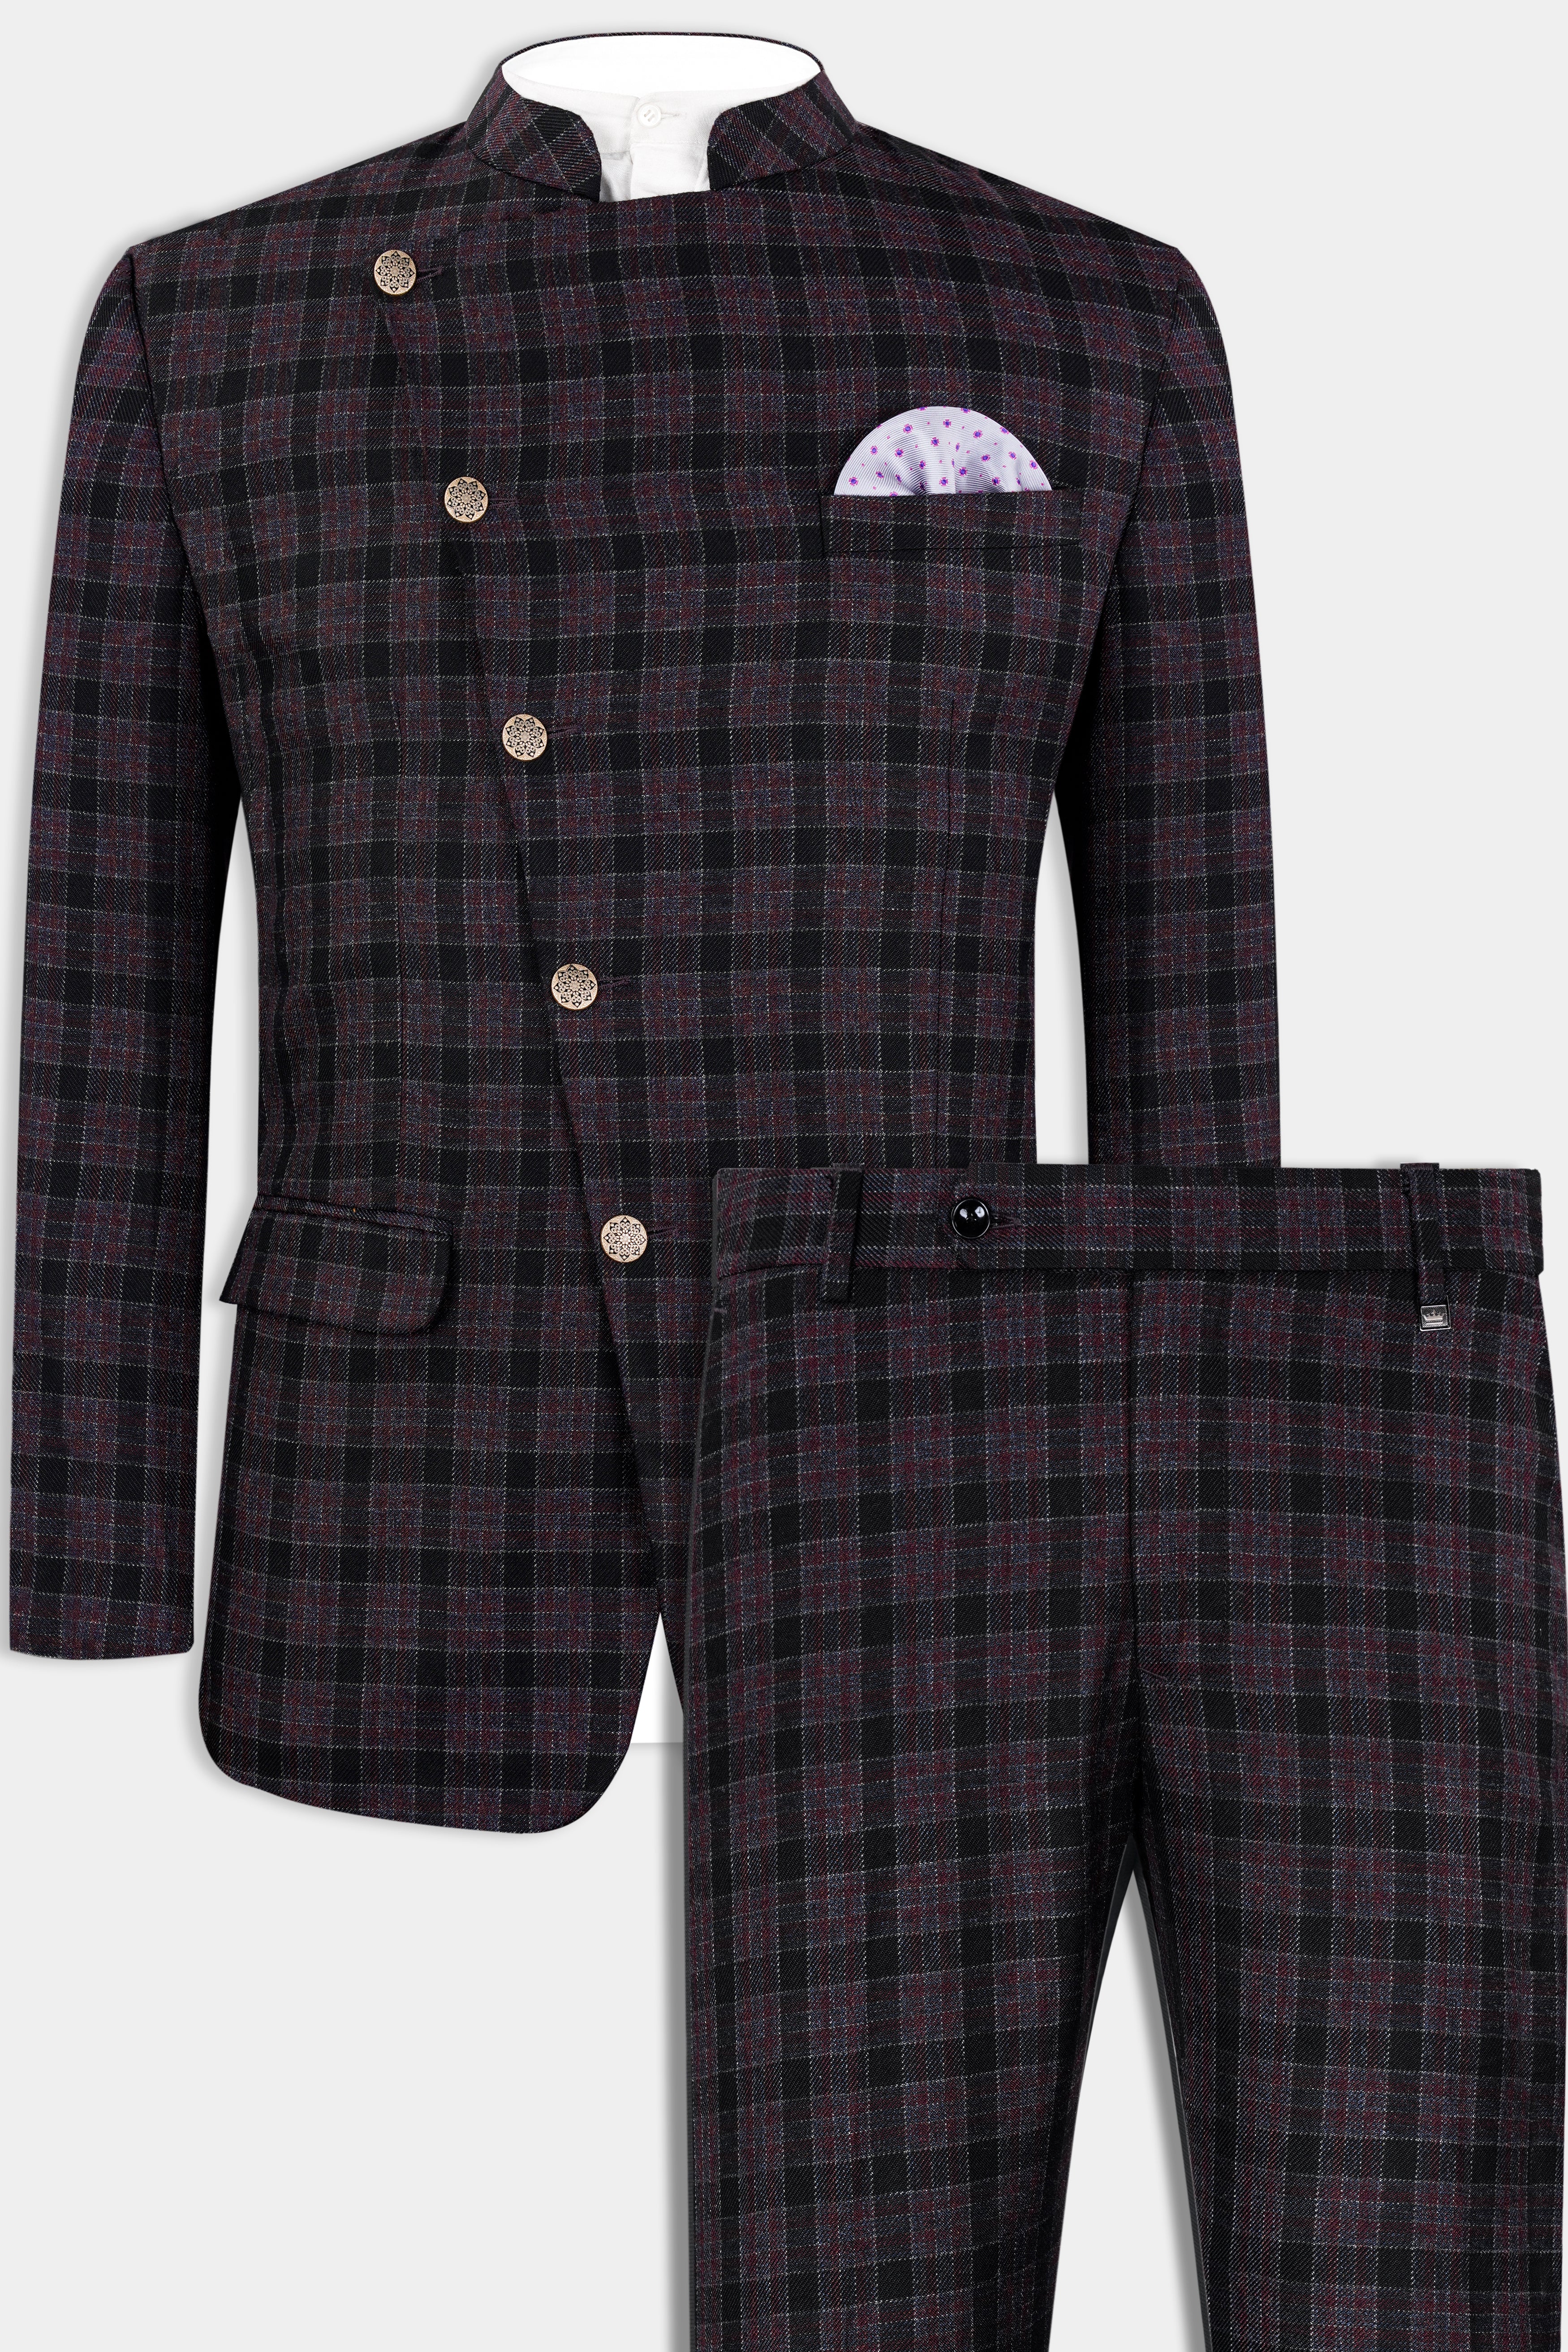 Byzantium Pink and Black Tweed Plaid Cross Buttoned Bandhgala Suit